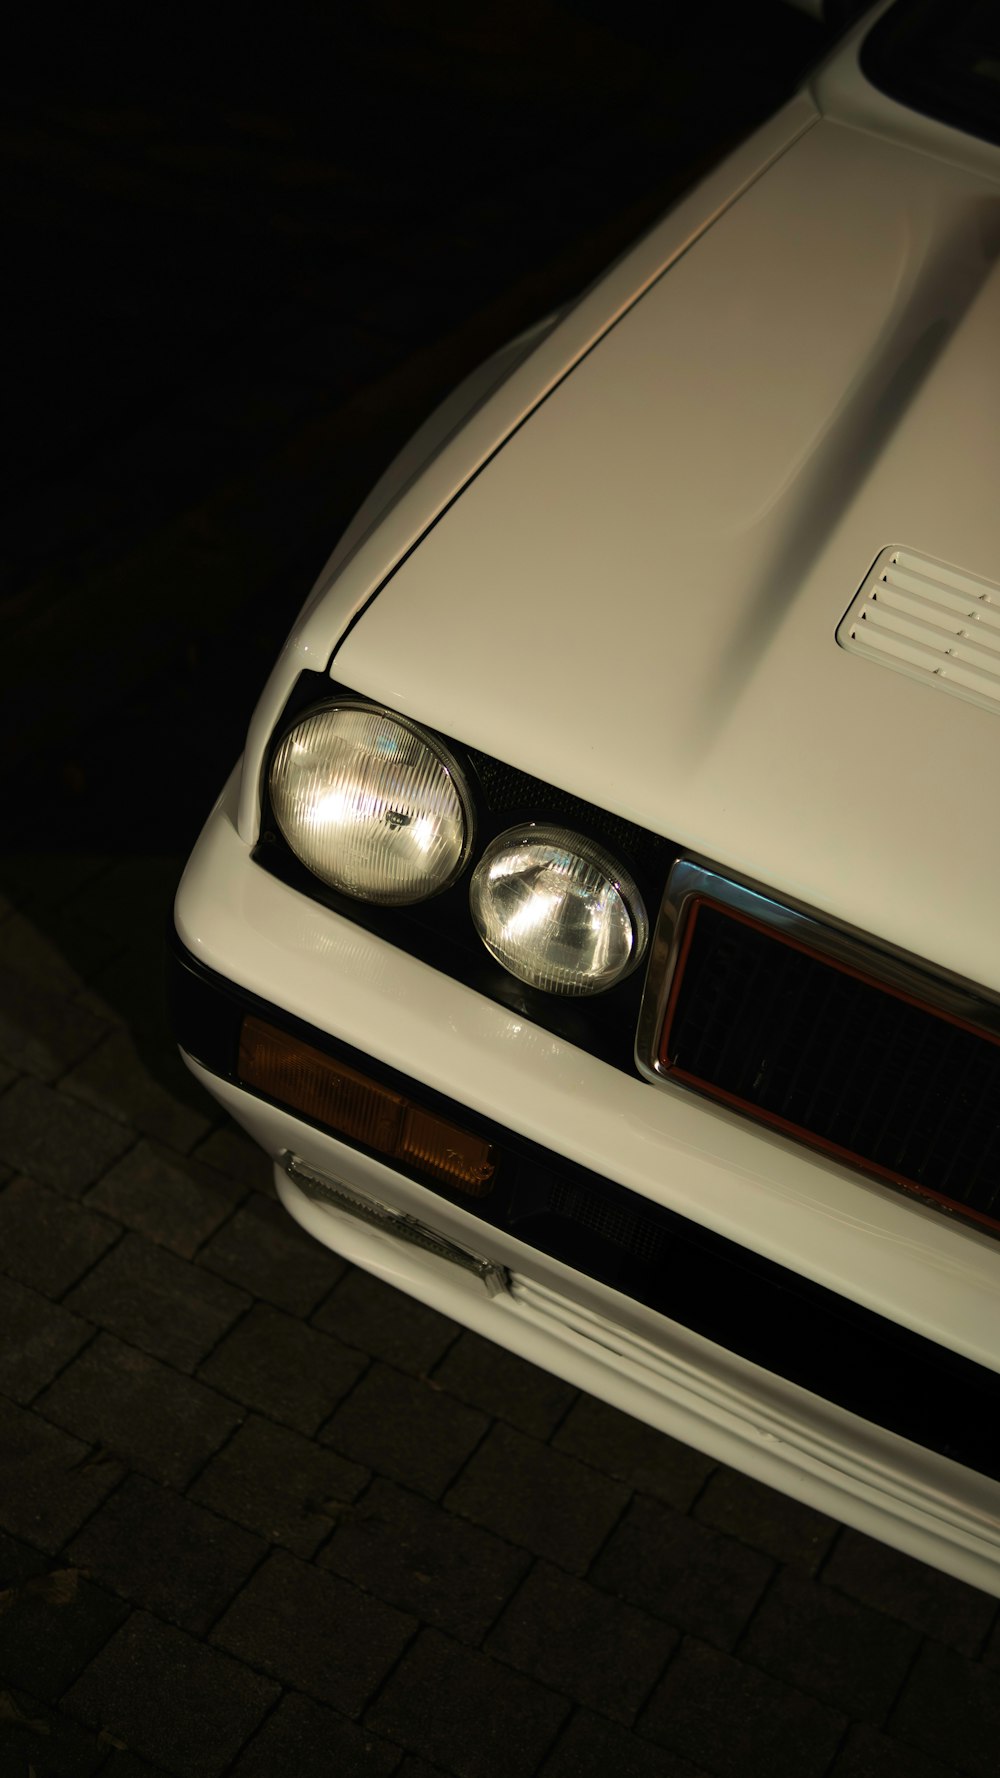 a close up of the headlights of a white car